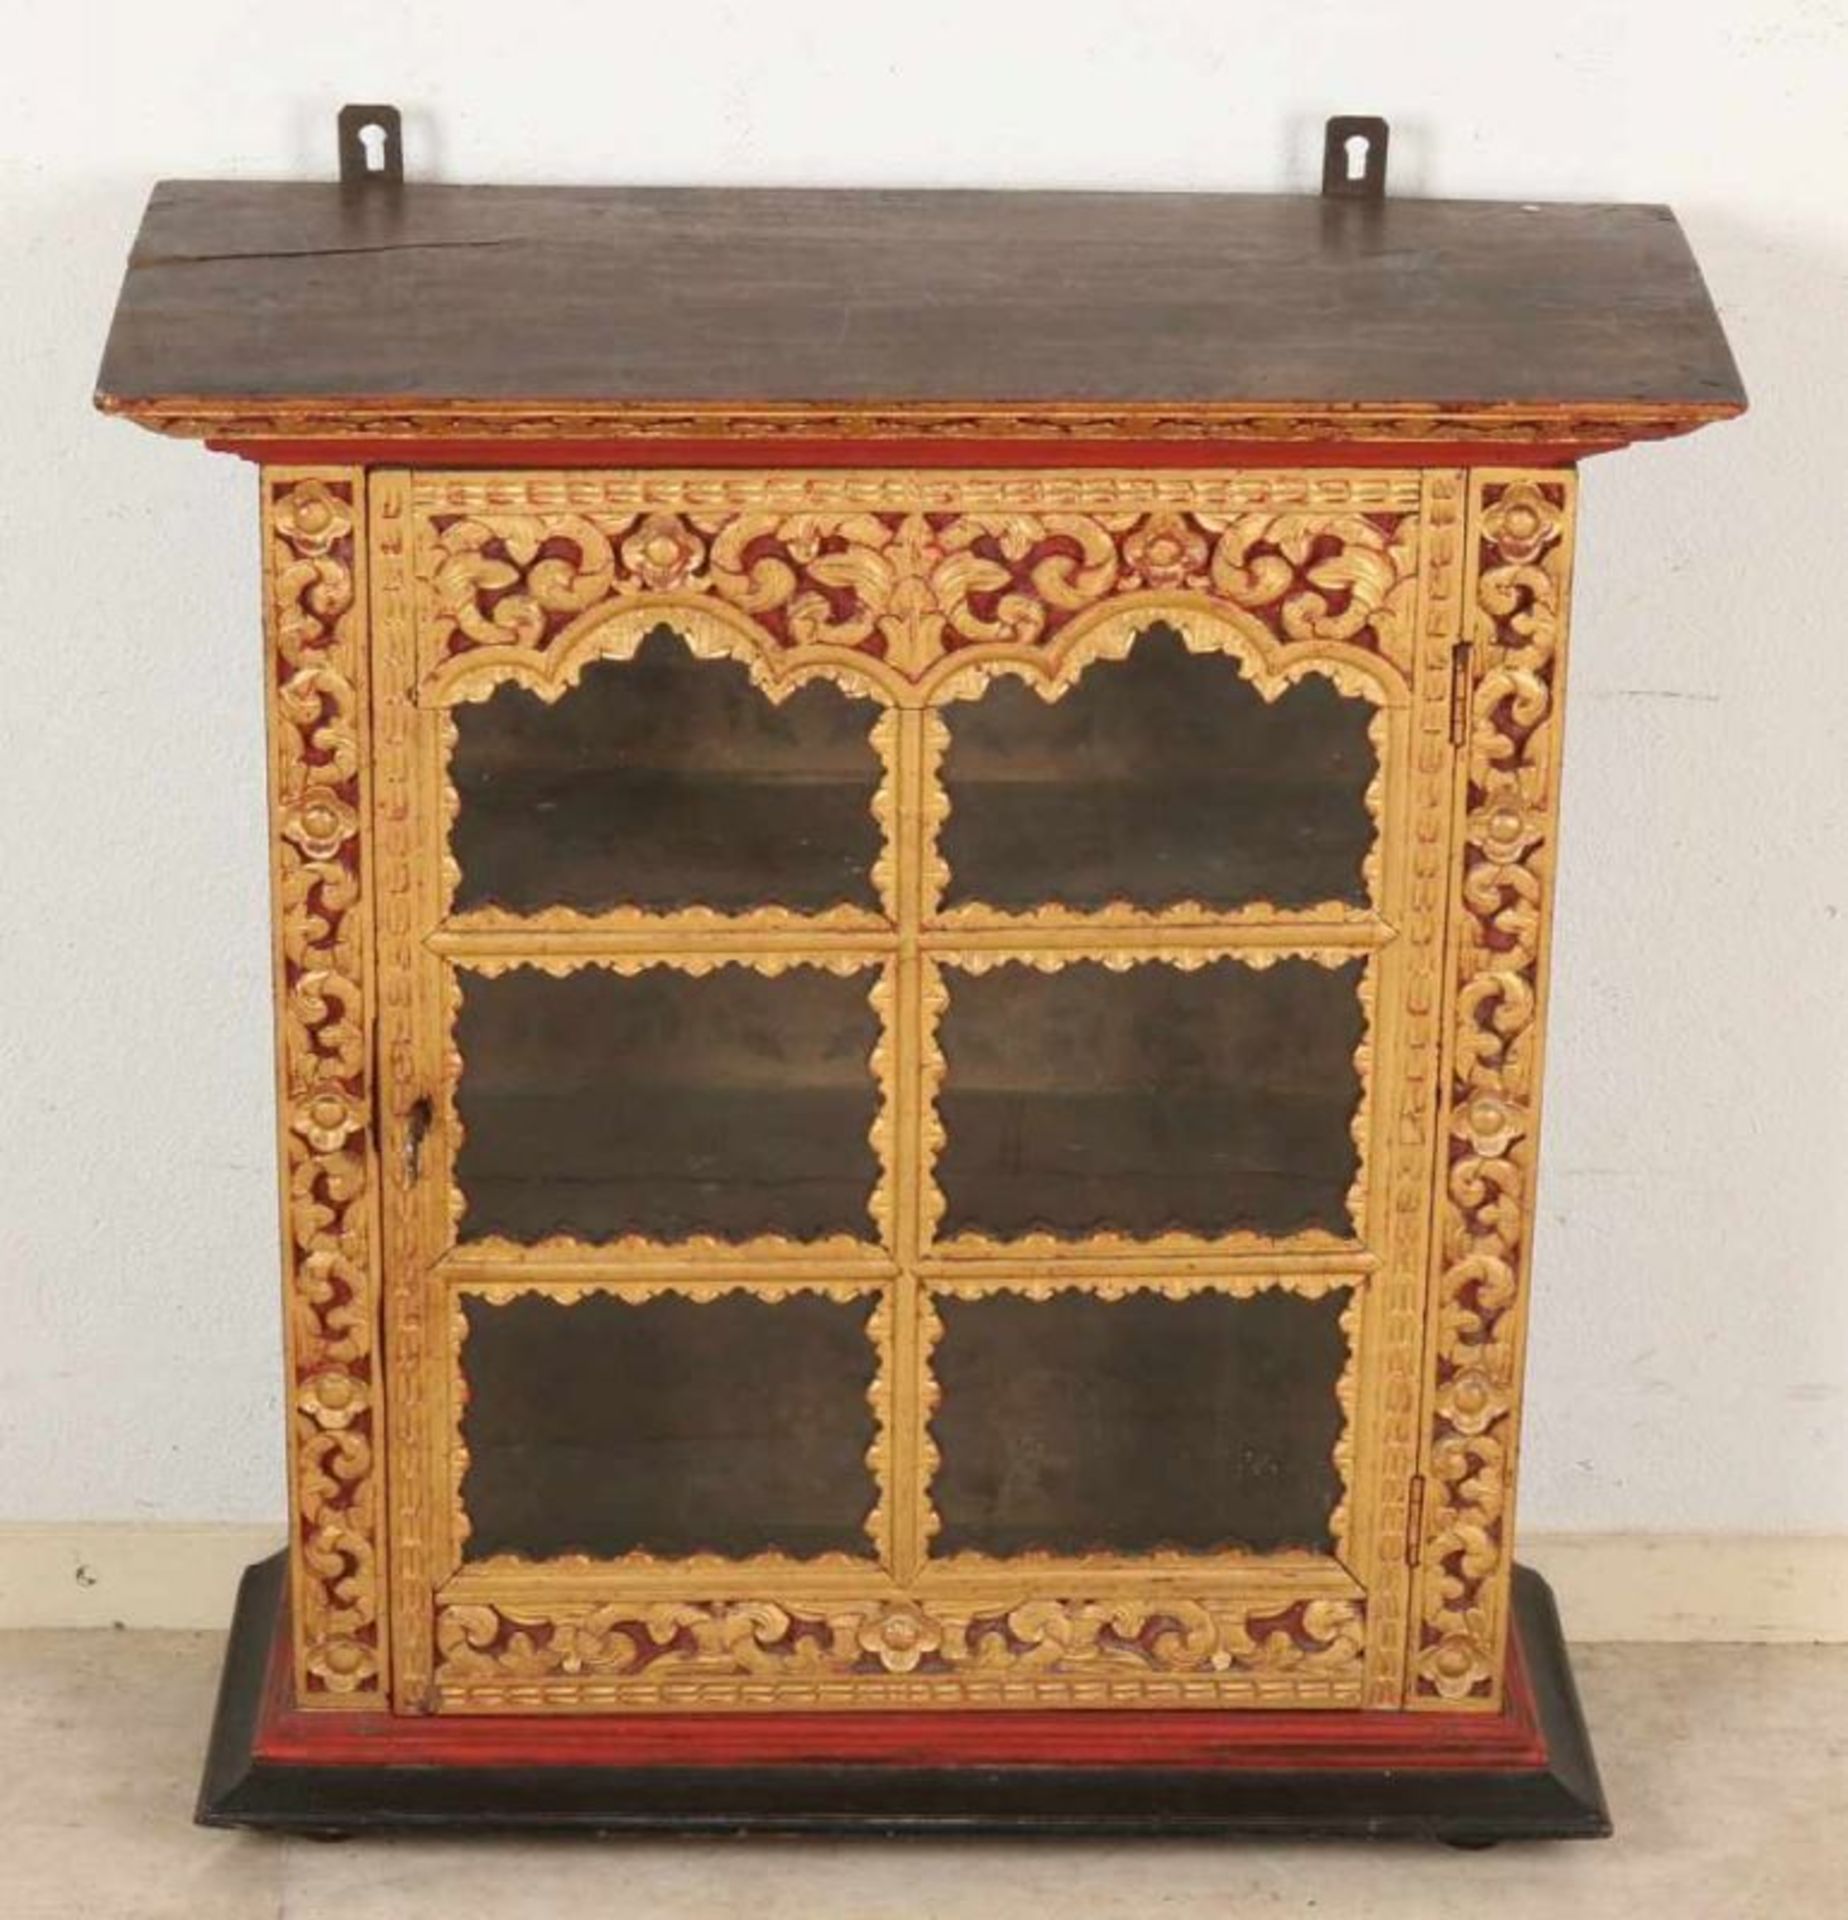 19th Century mahogany display case with front suspension Oriental gold leaf. Size: 73 x 70 x 30